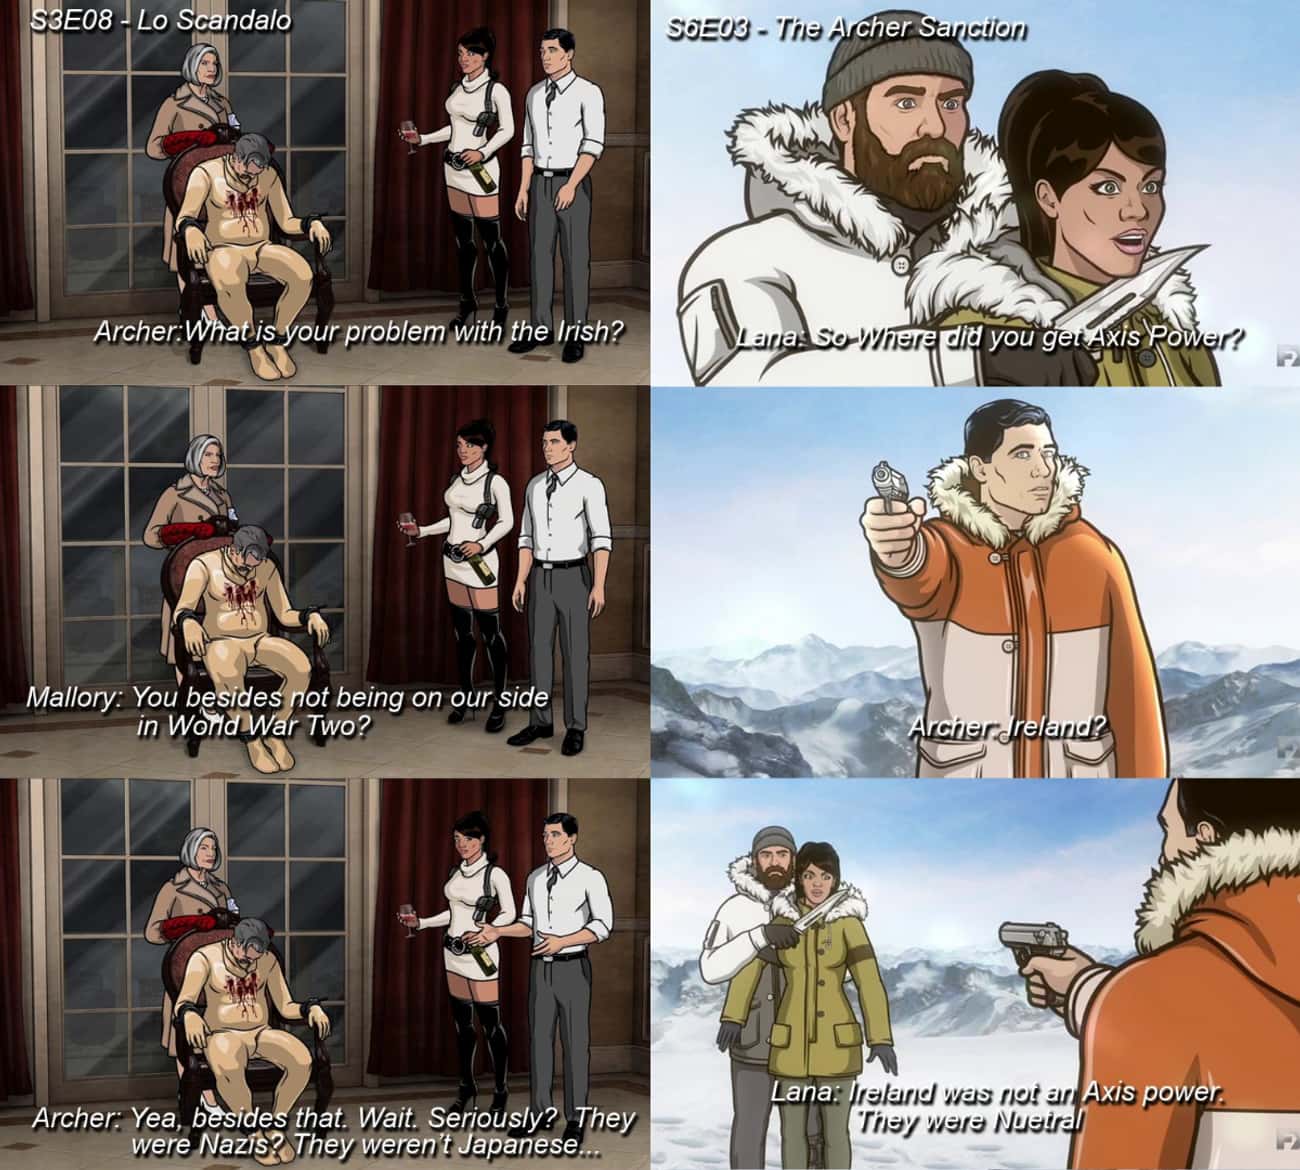 Malory's Misinformation About The Allies In WWII Is Repeated By Archer